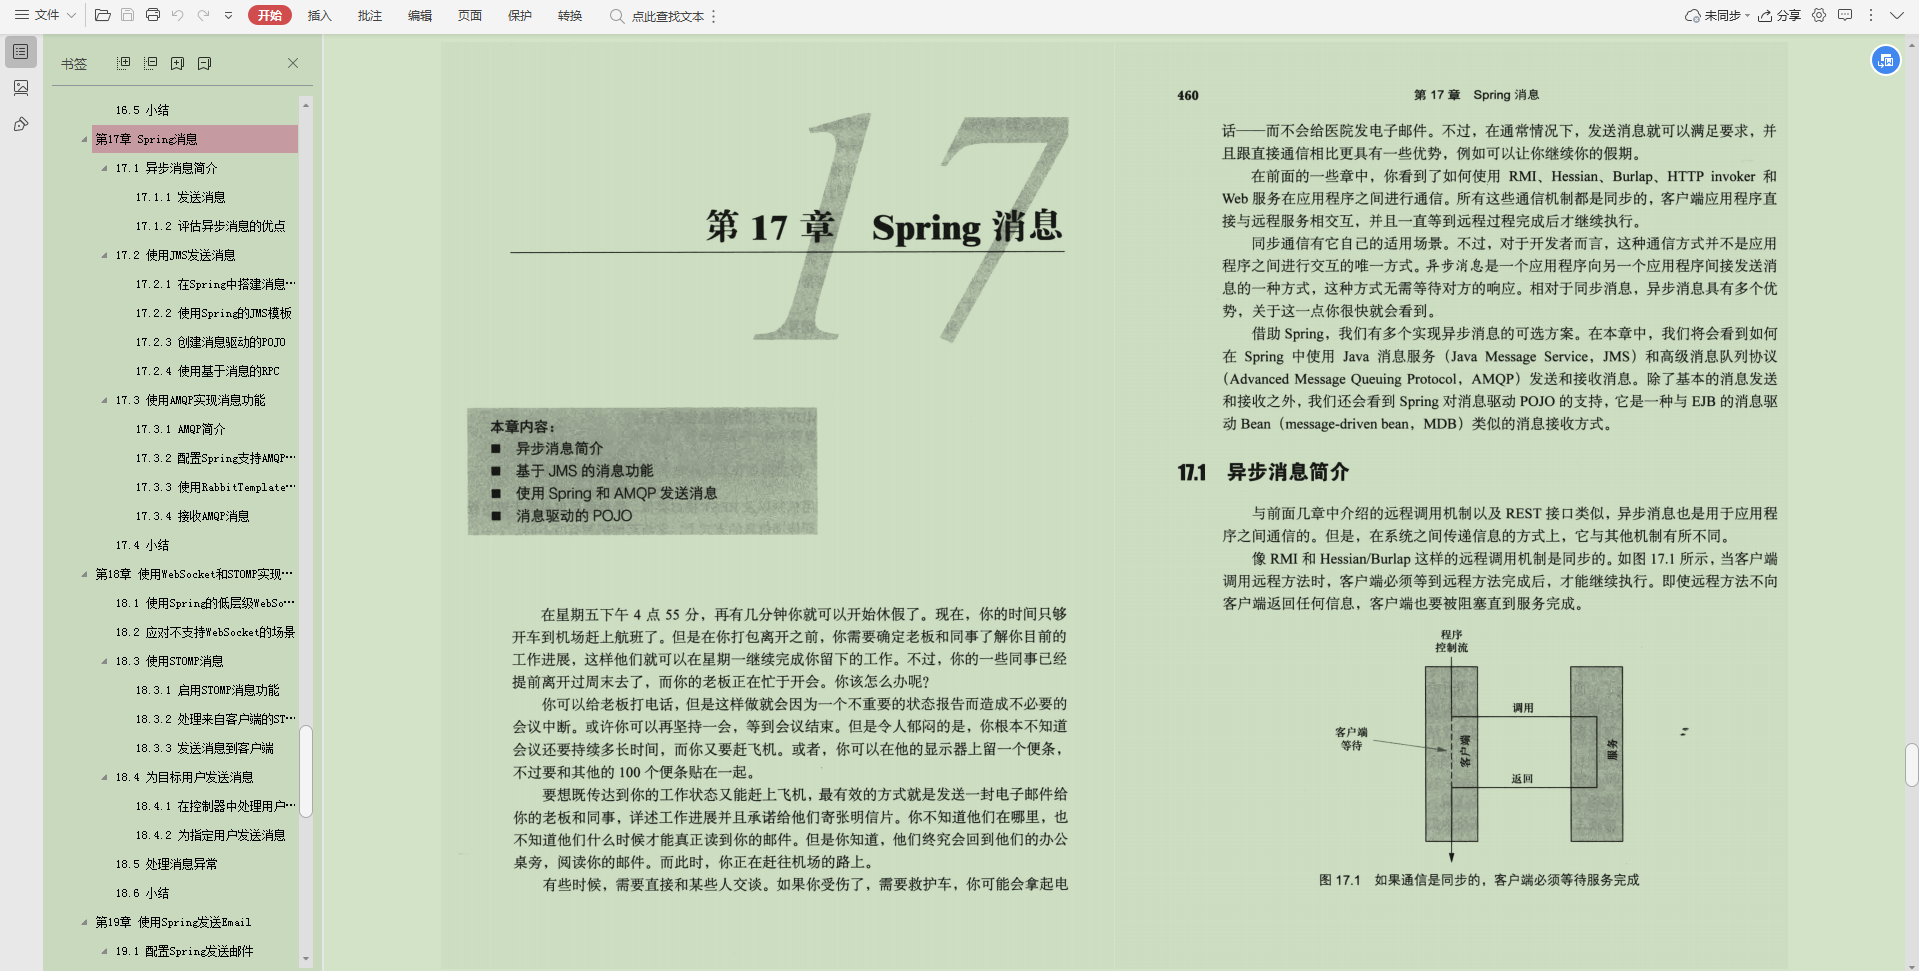 Great!  Alibaba Intranet Spring Manual is too complete, the internal information is really fragrant